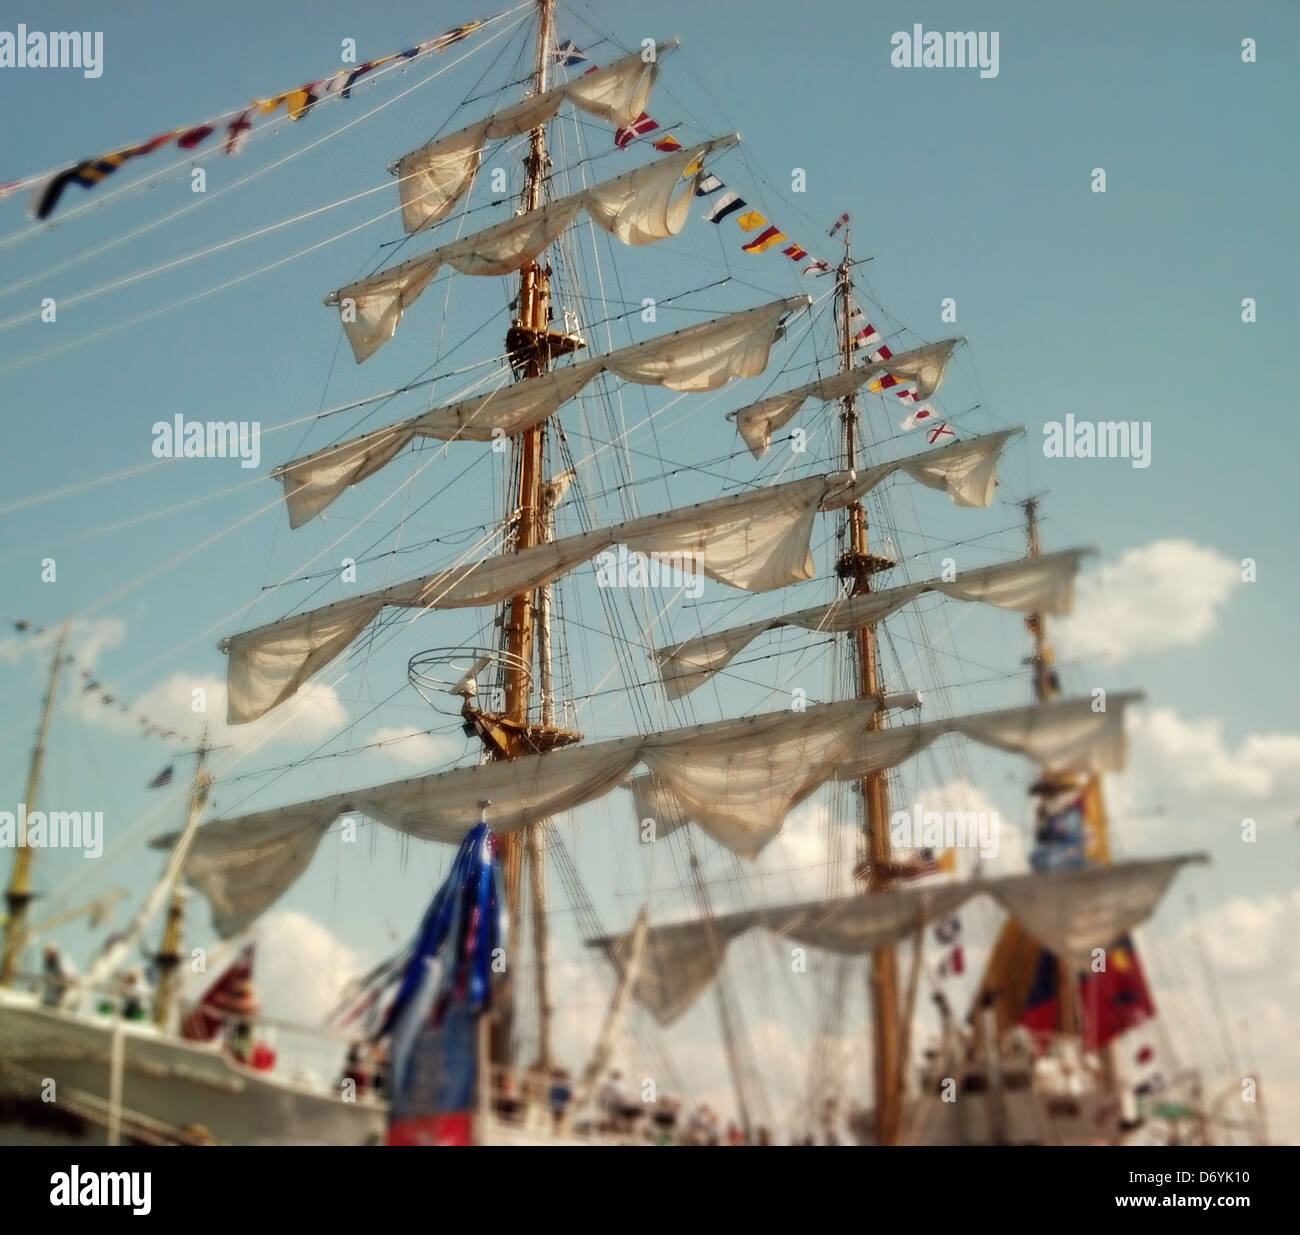 Old fashioned wooden-masted ship with sails, Norfolk, Virginia, United States Stock Photo